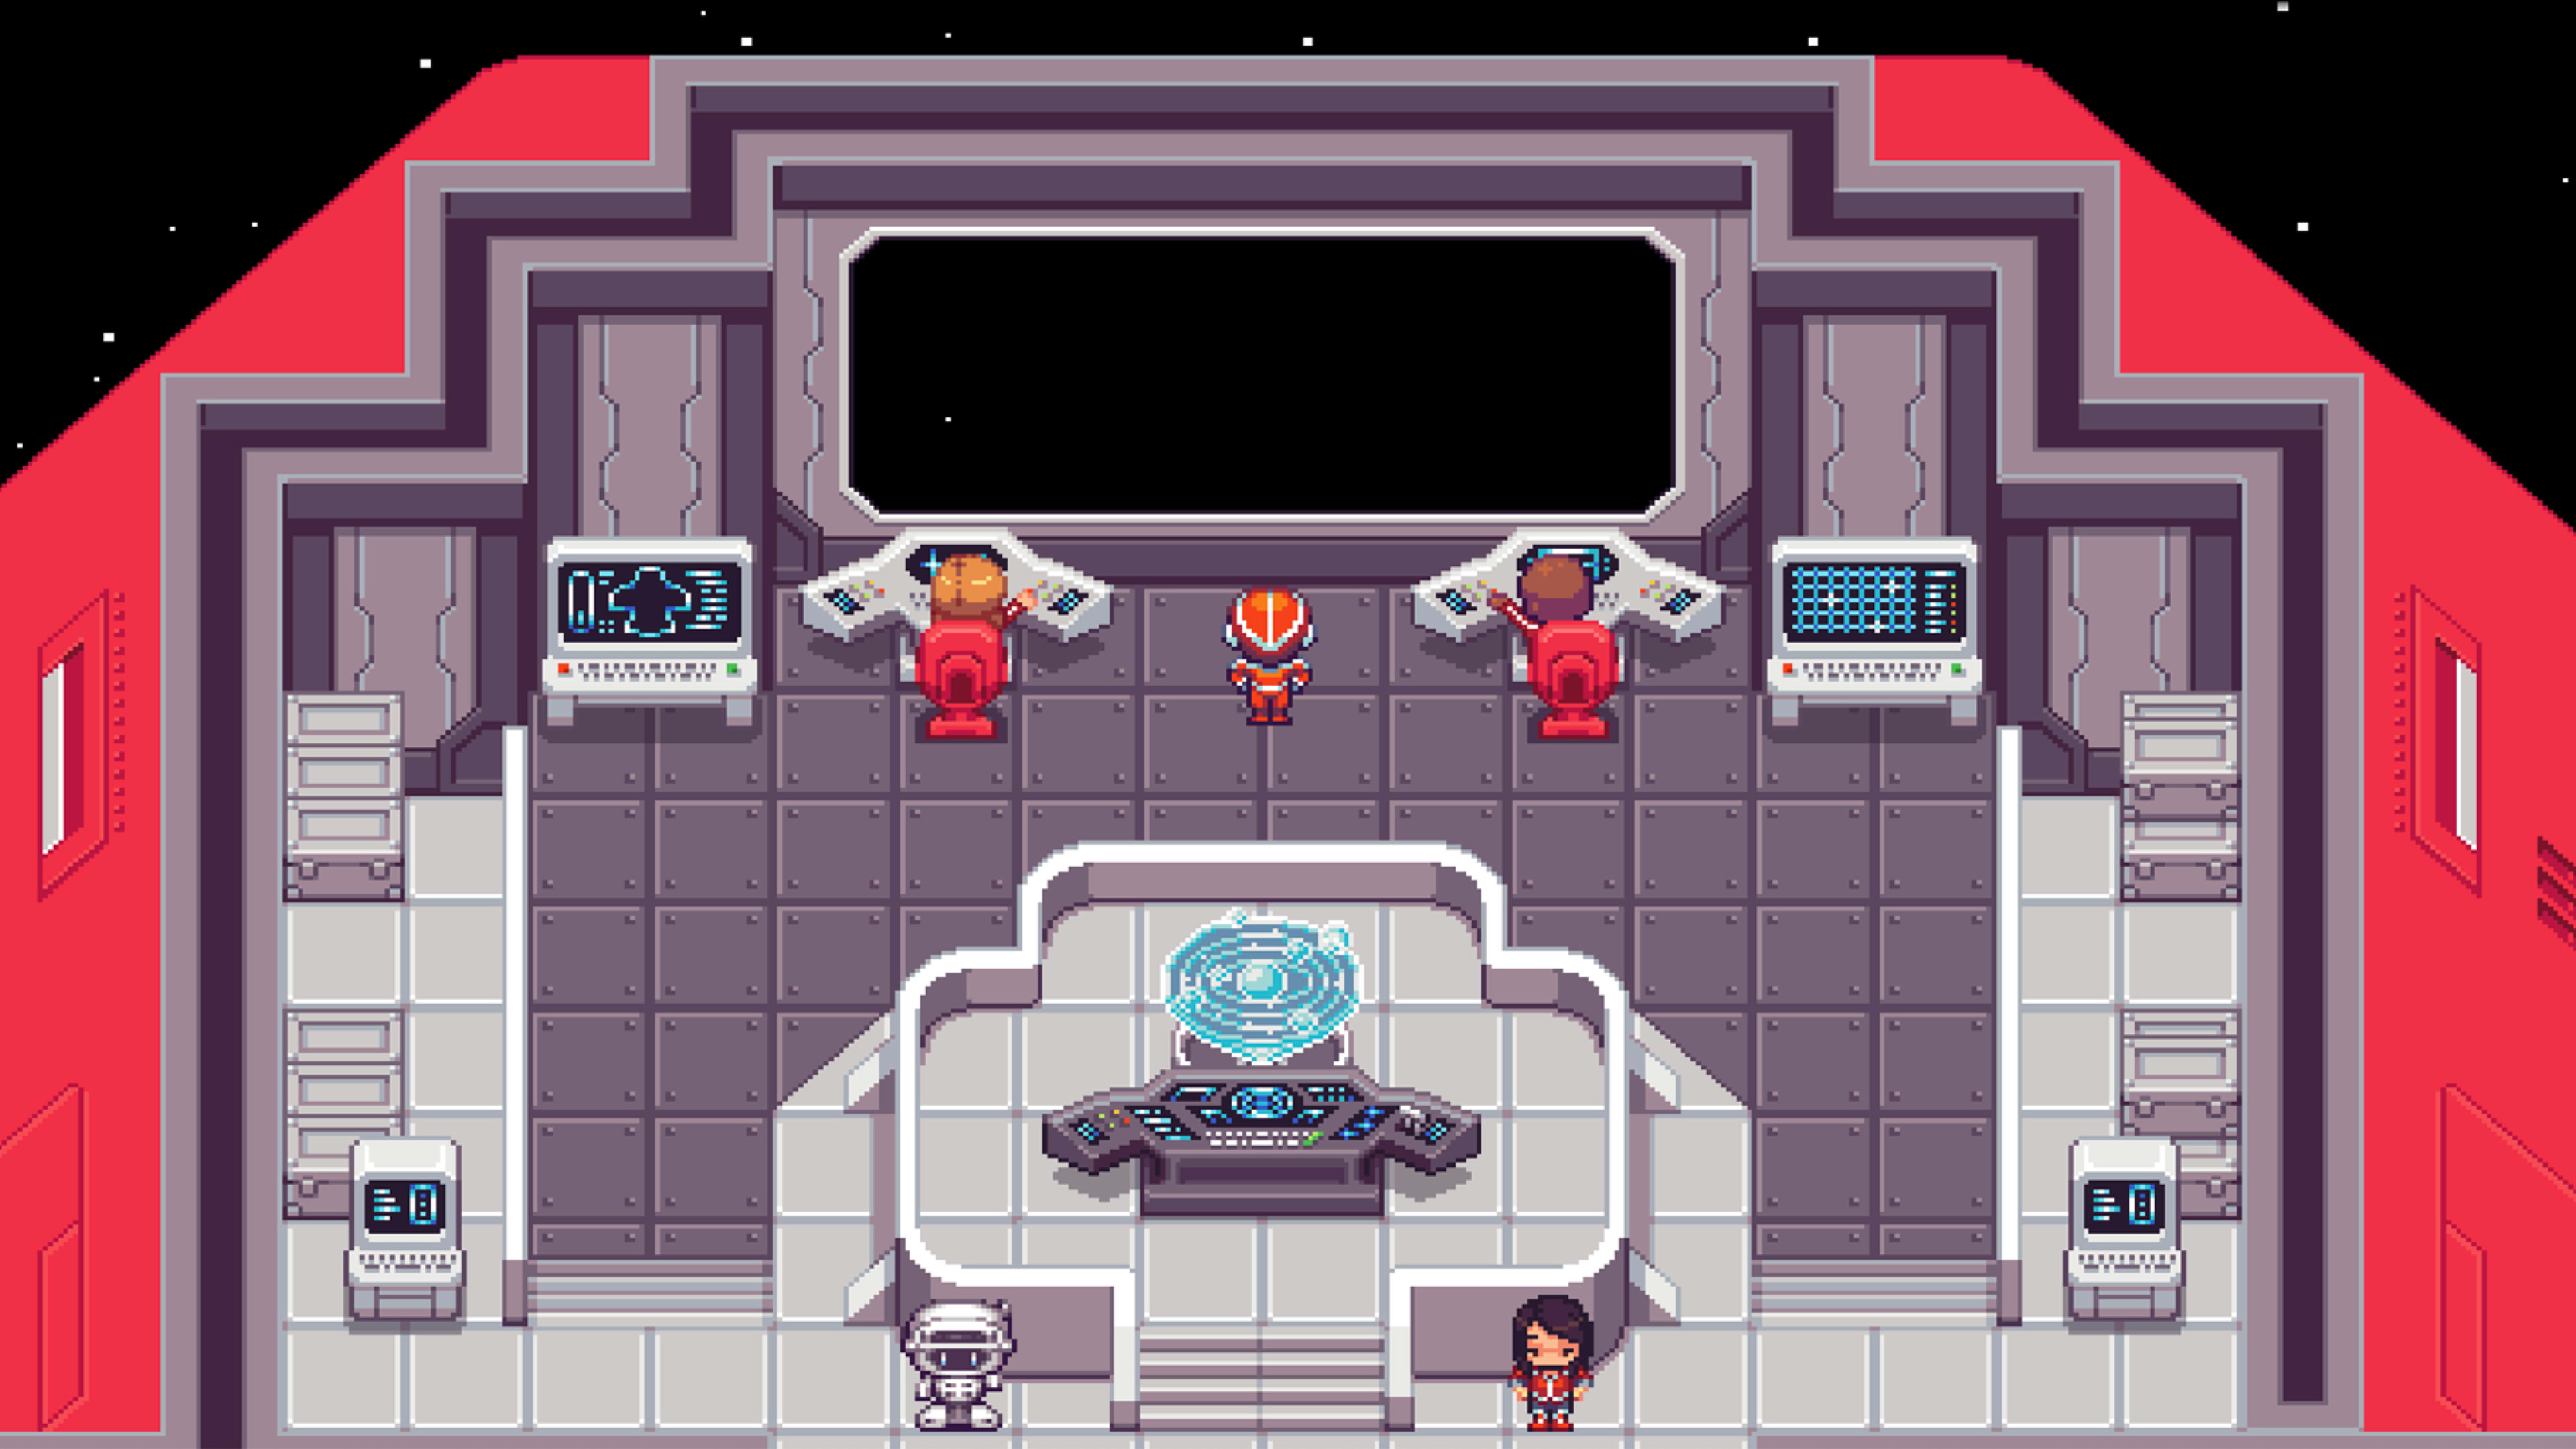 Want to learn to code? Play this Super Nintendo-style video game, TwilioQuest.